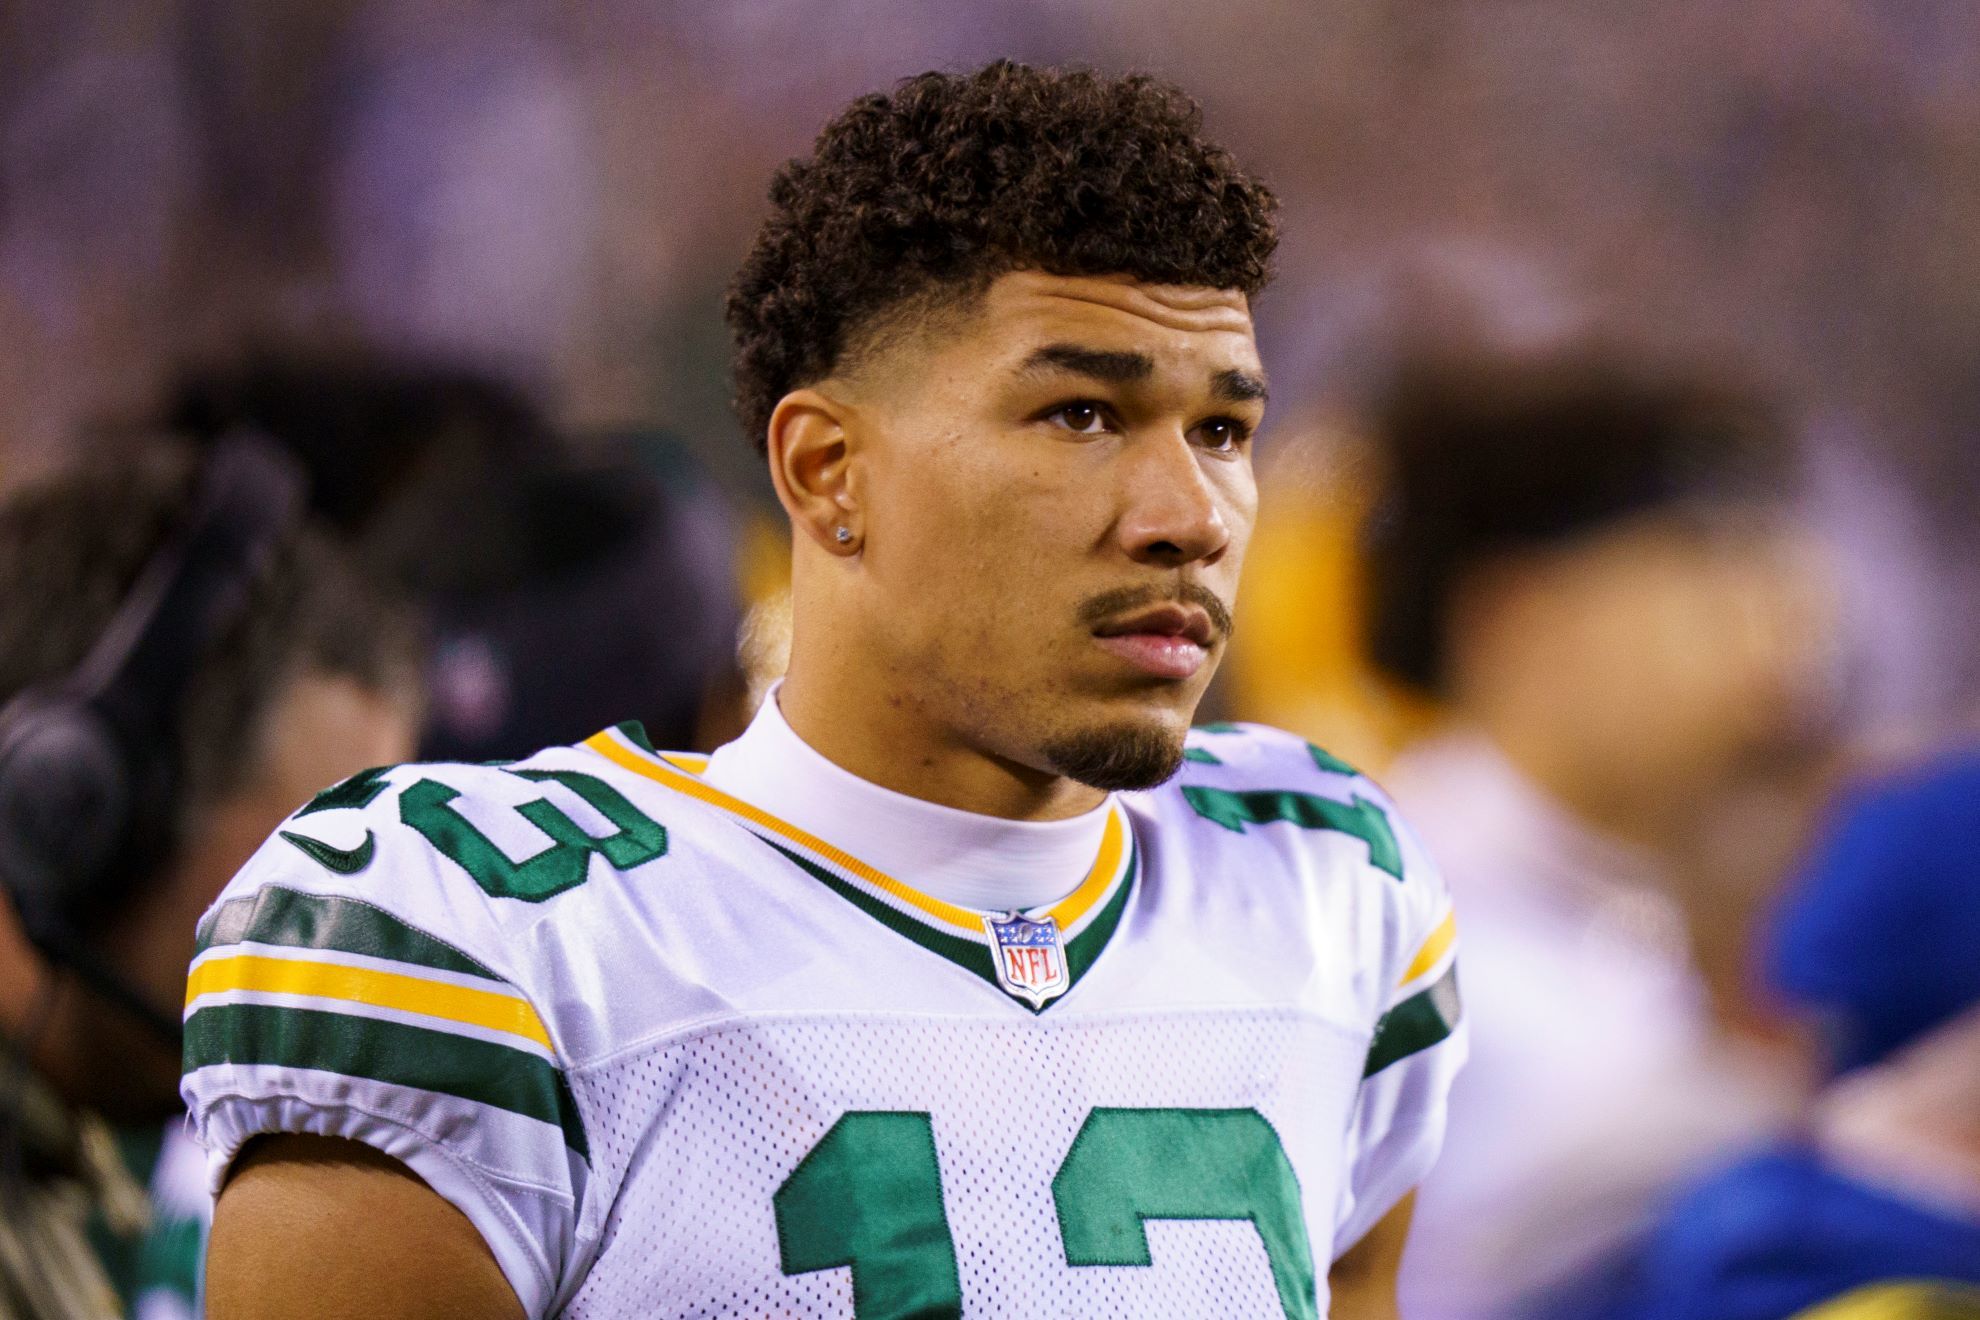 Green Bay Packers wide receiver Allen Lazard (13) looks on during an NFL football game.